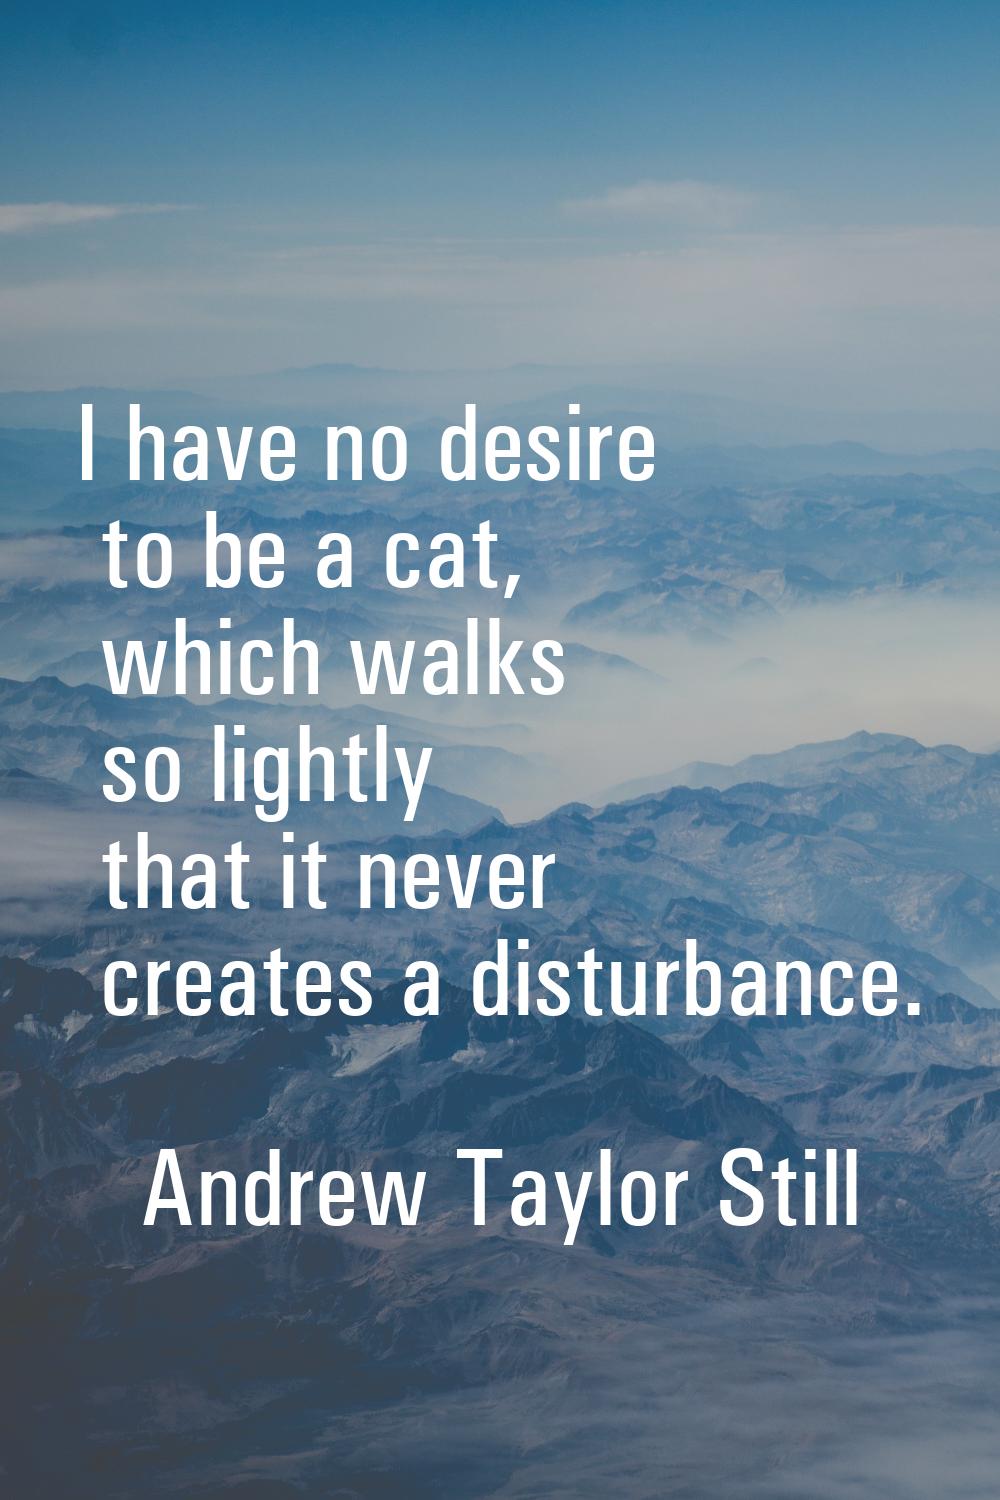 I have no desire to be a cat, which walks so lightly that it never creates a disturbance.